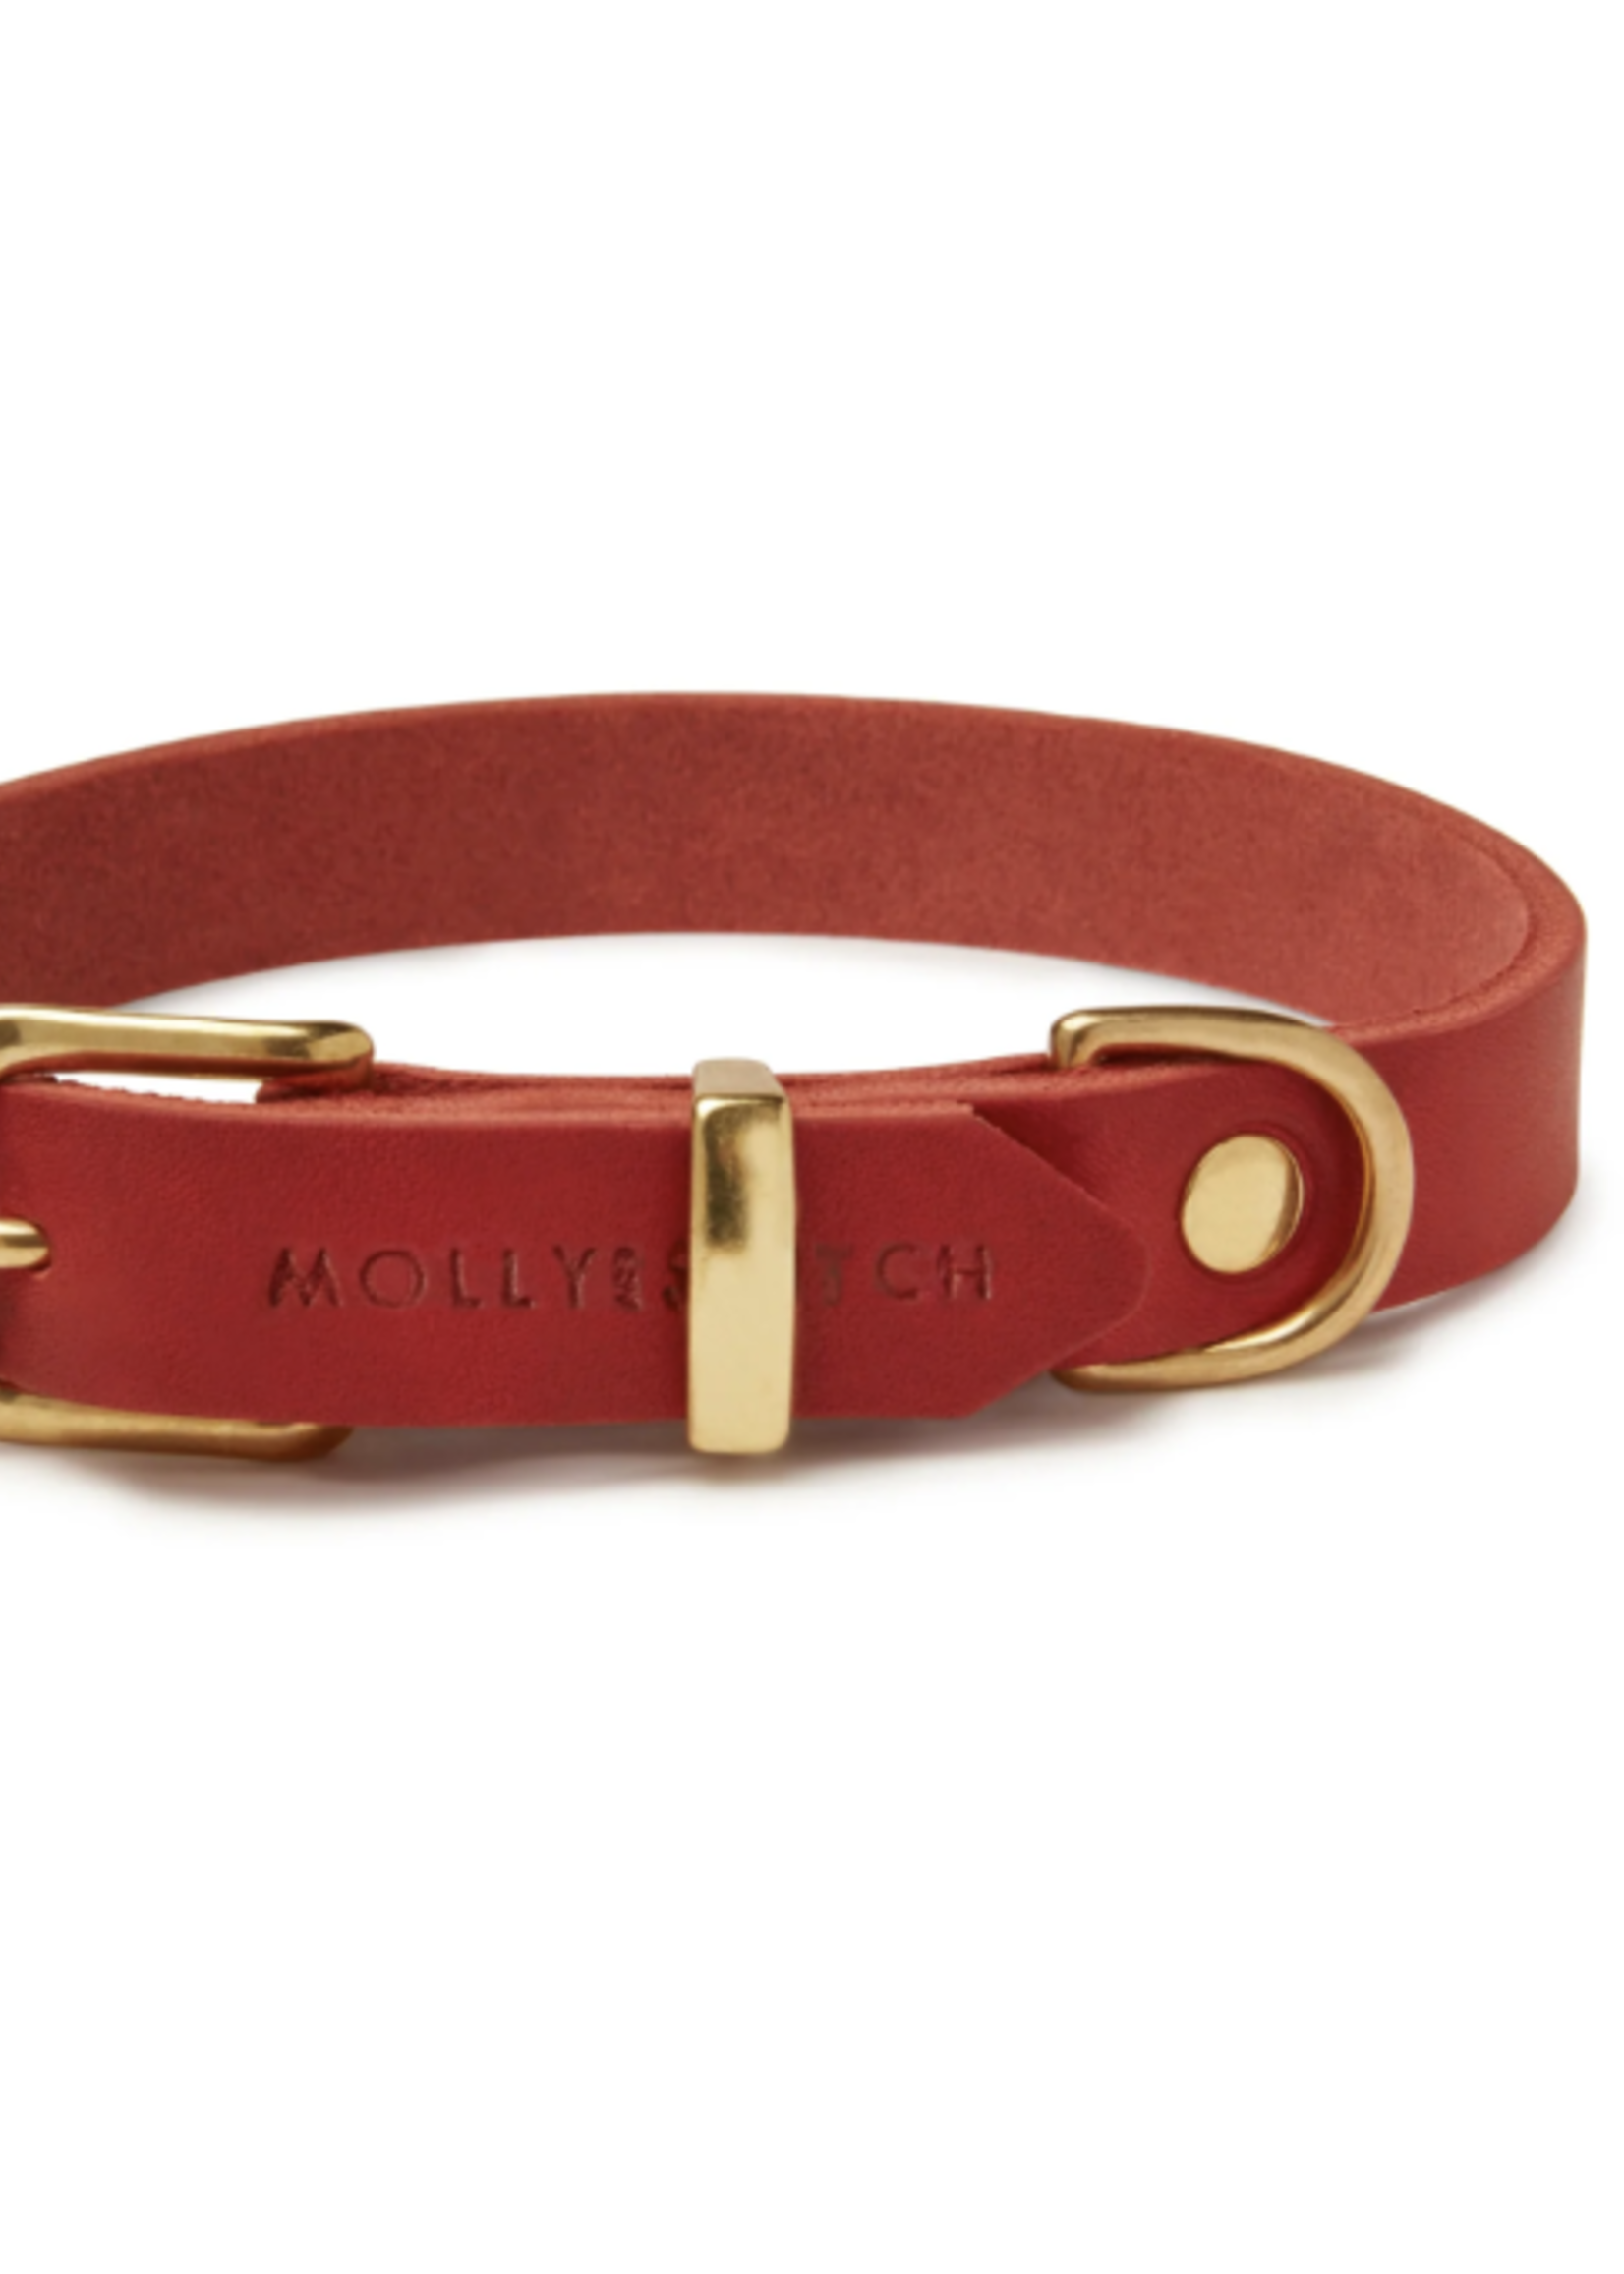 MOLLY AND STITCH Butter Leather Dog Collar